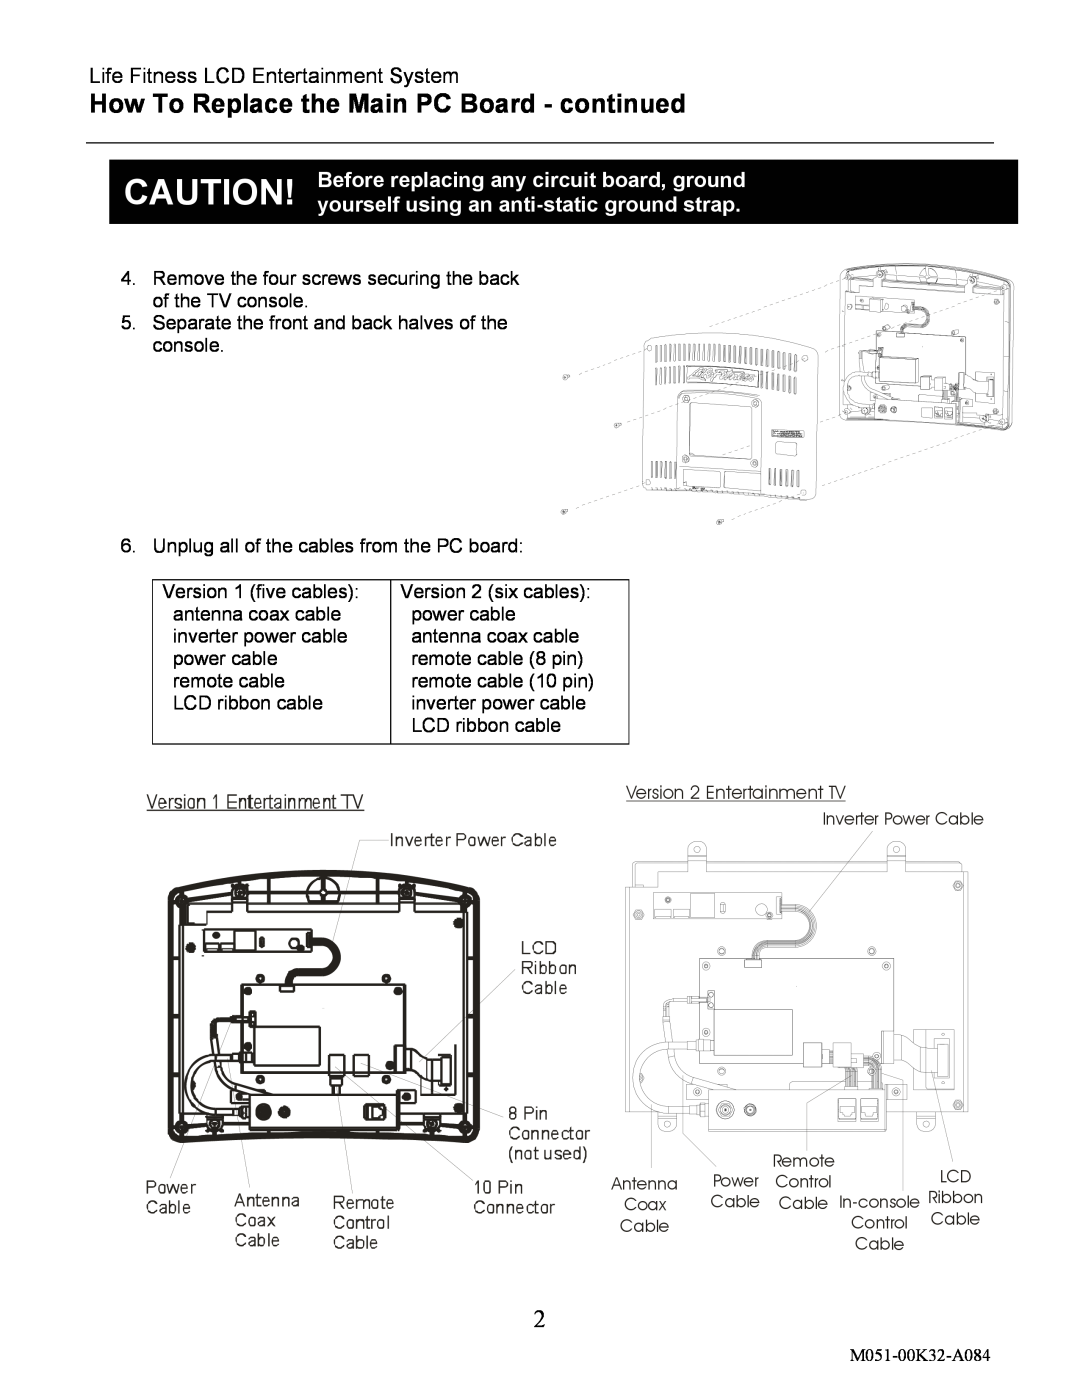 Life Fitness M051-00K32-A084 manual How To Replace the Main PC Board - continued, Life Fitness LCD Entertainment System 